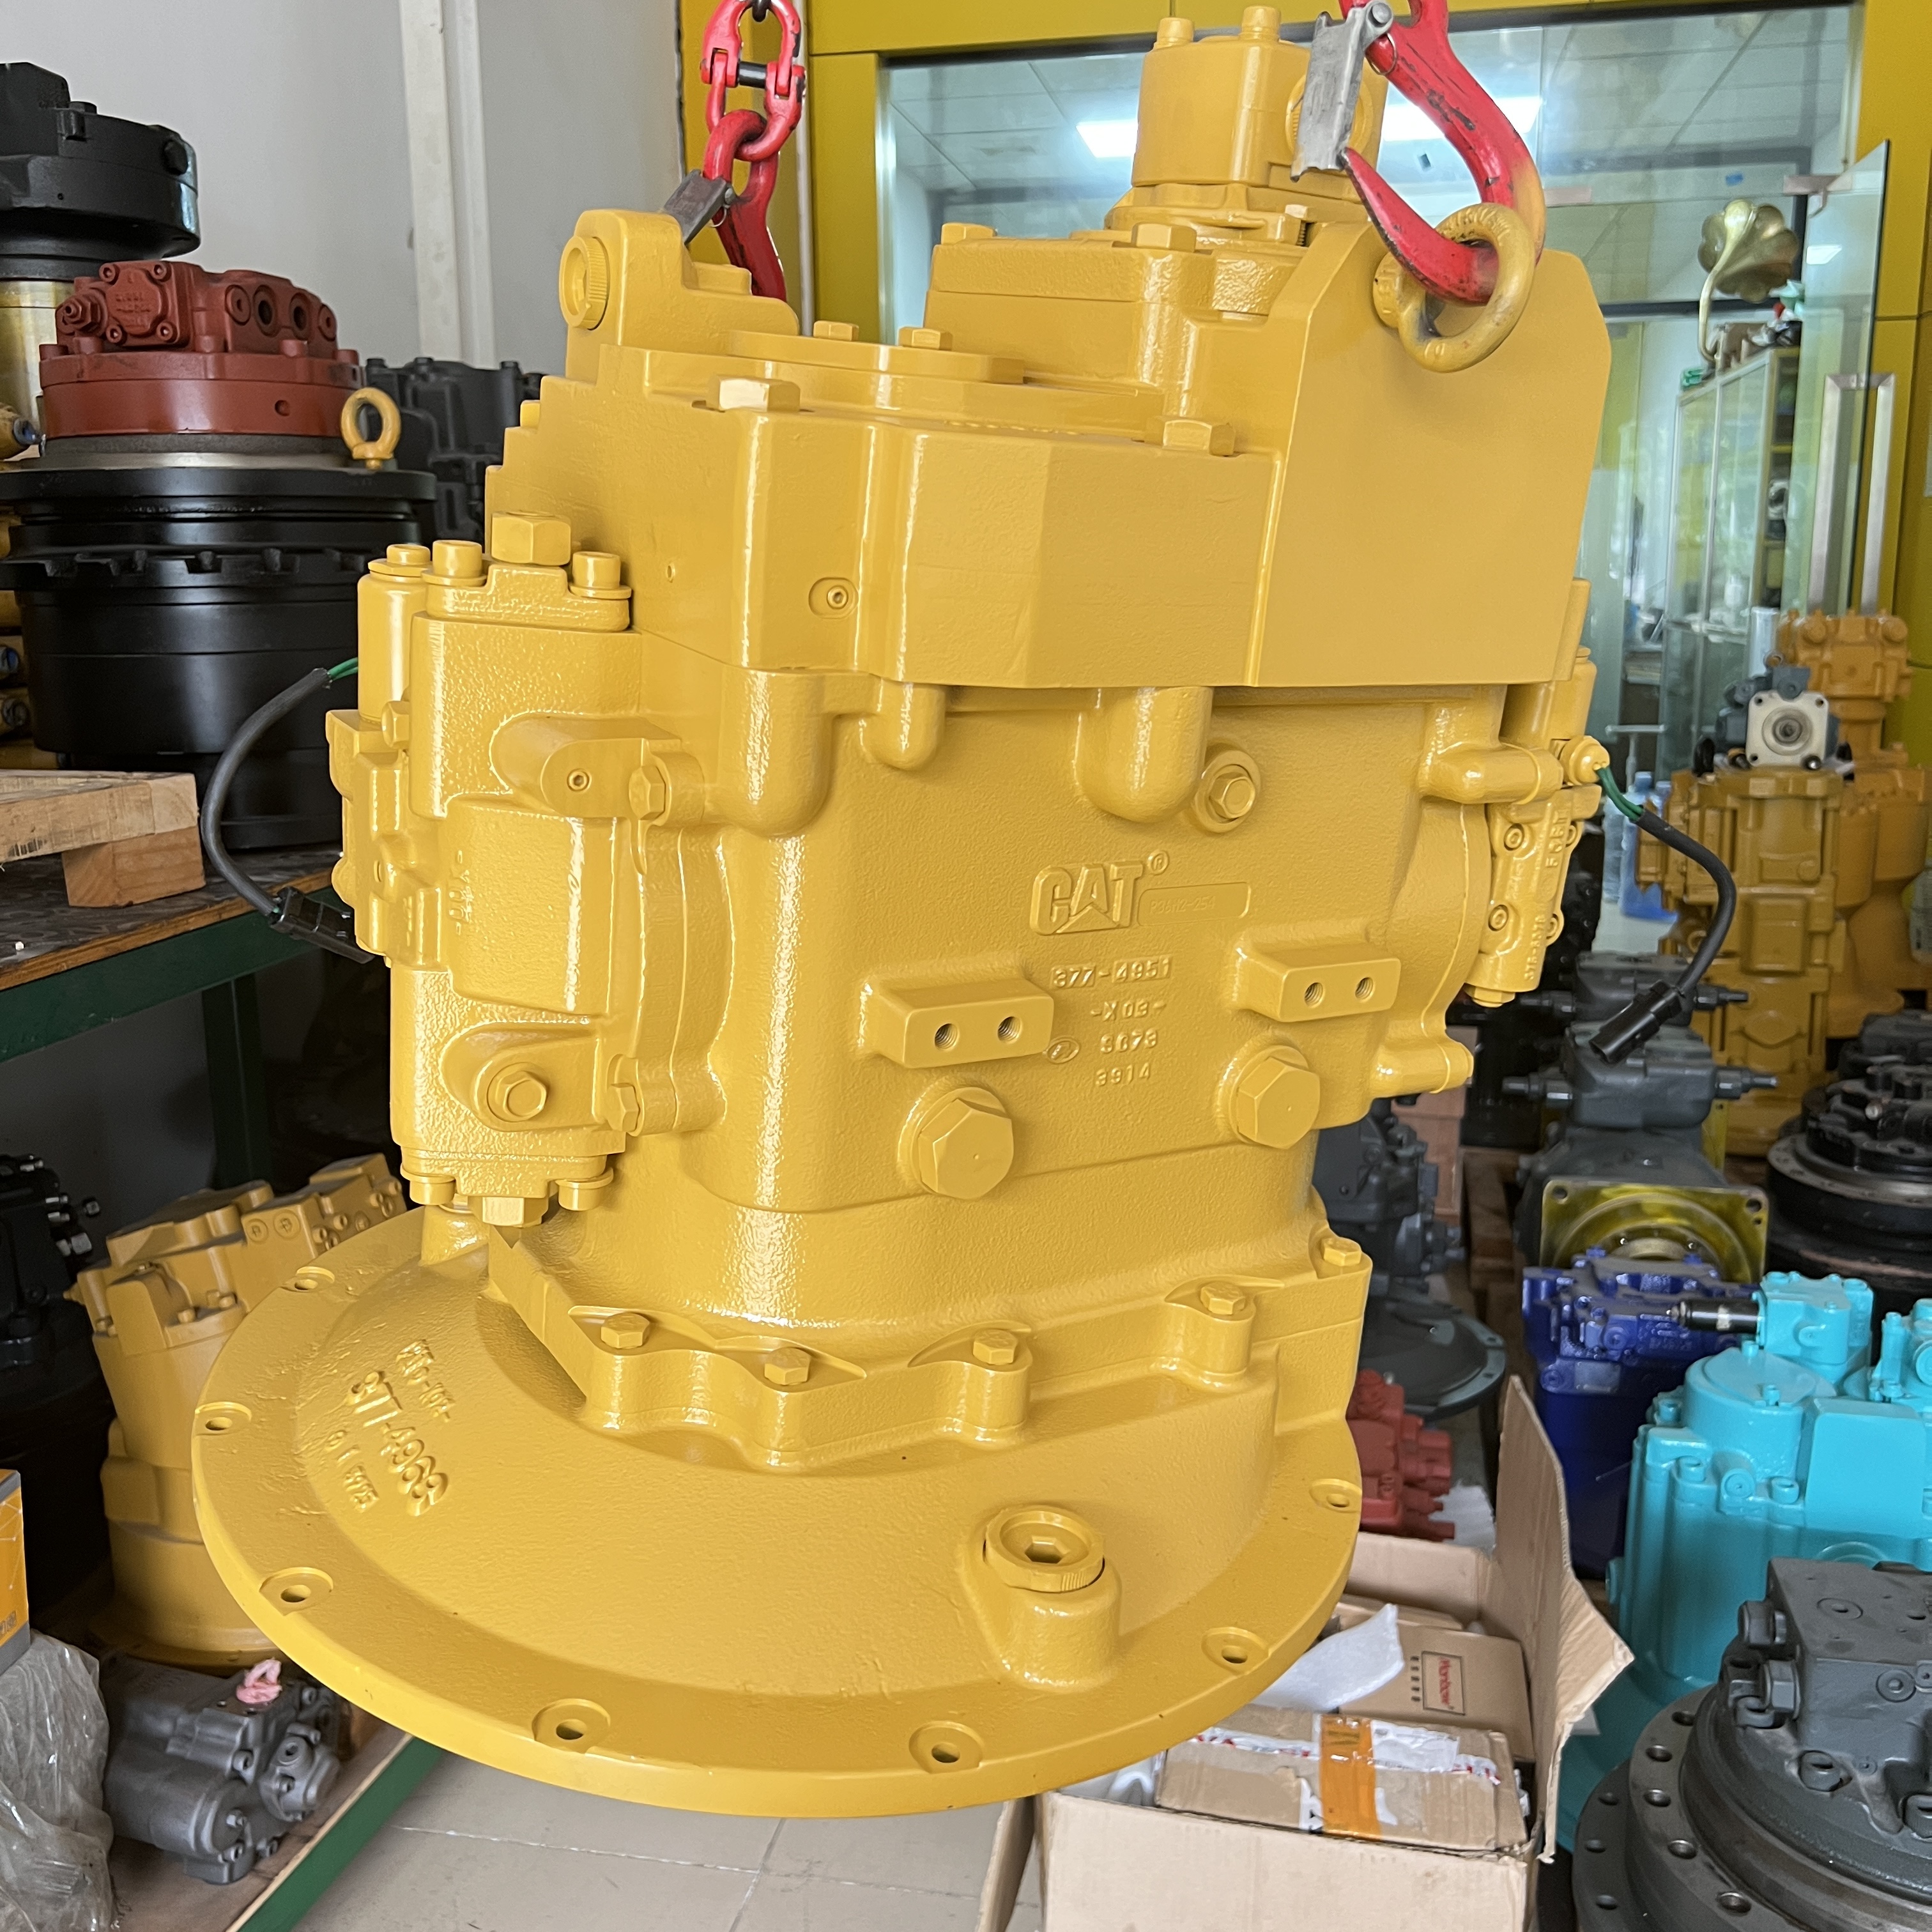 CATERPILLAR 377-4950 HYDRAULIC PUMP. High quality and low price sales